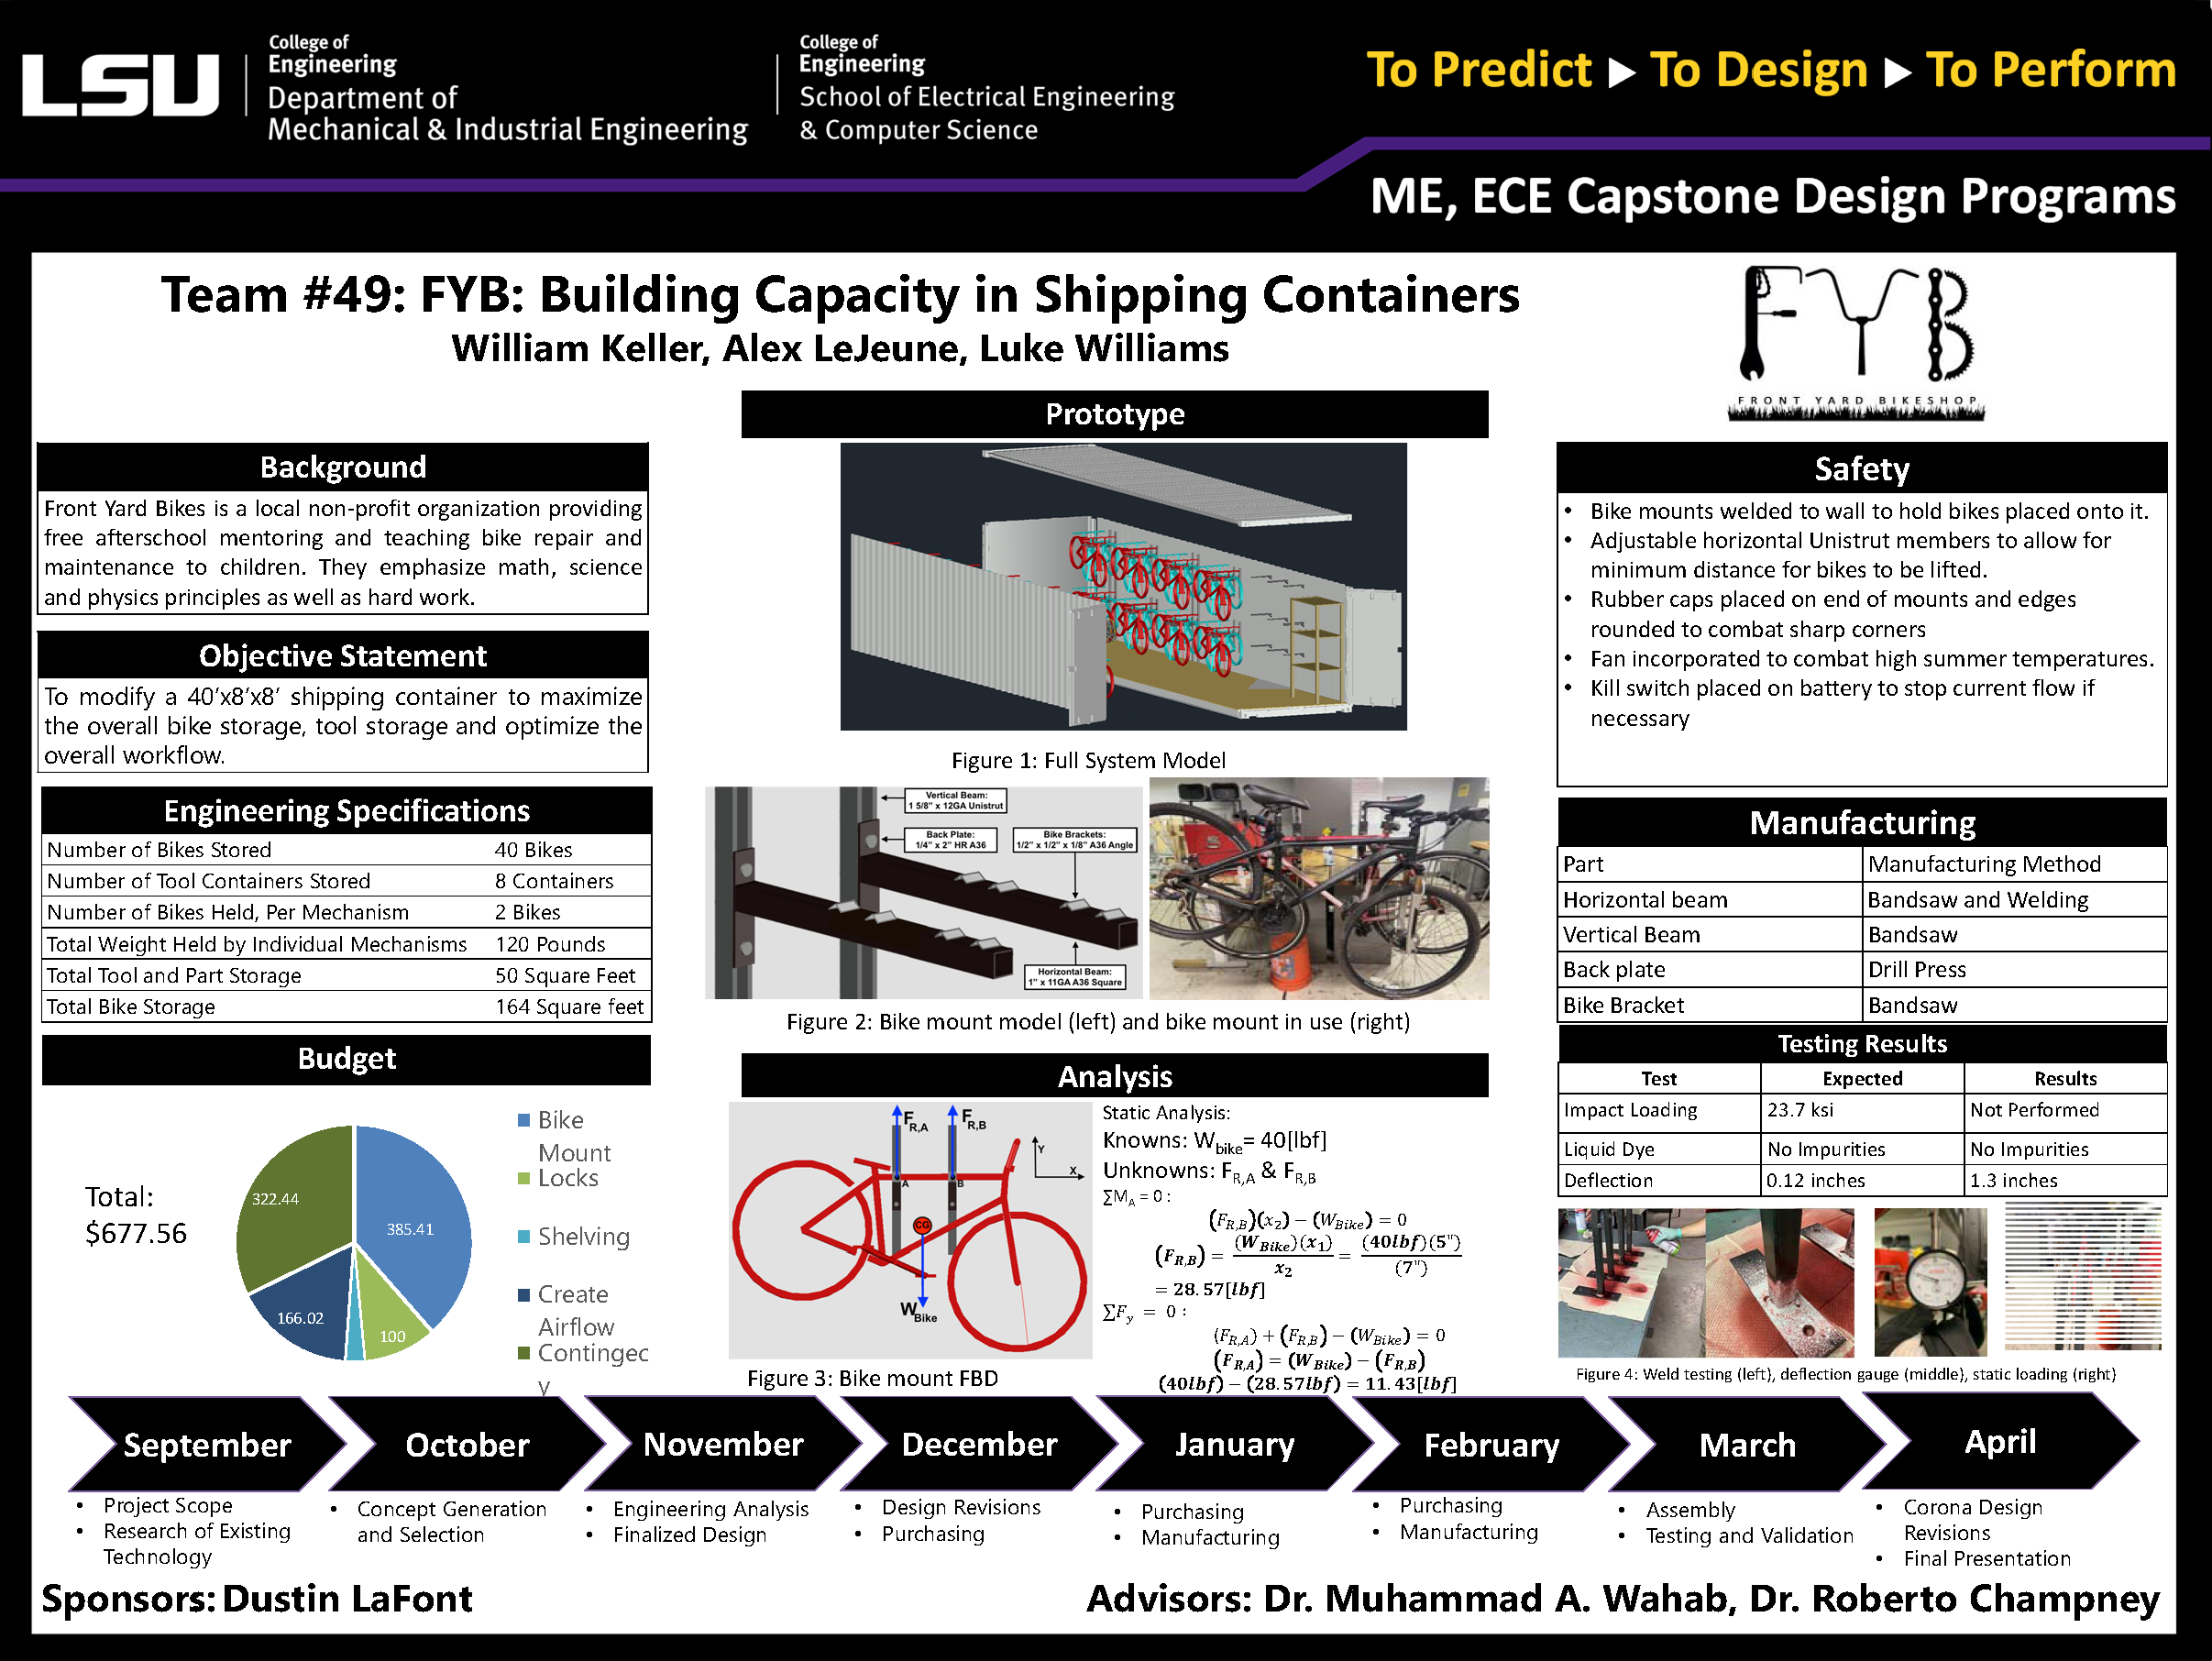 Project 49 Poster: FYB: Building Capacity in Shipping Containers (2020)